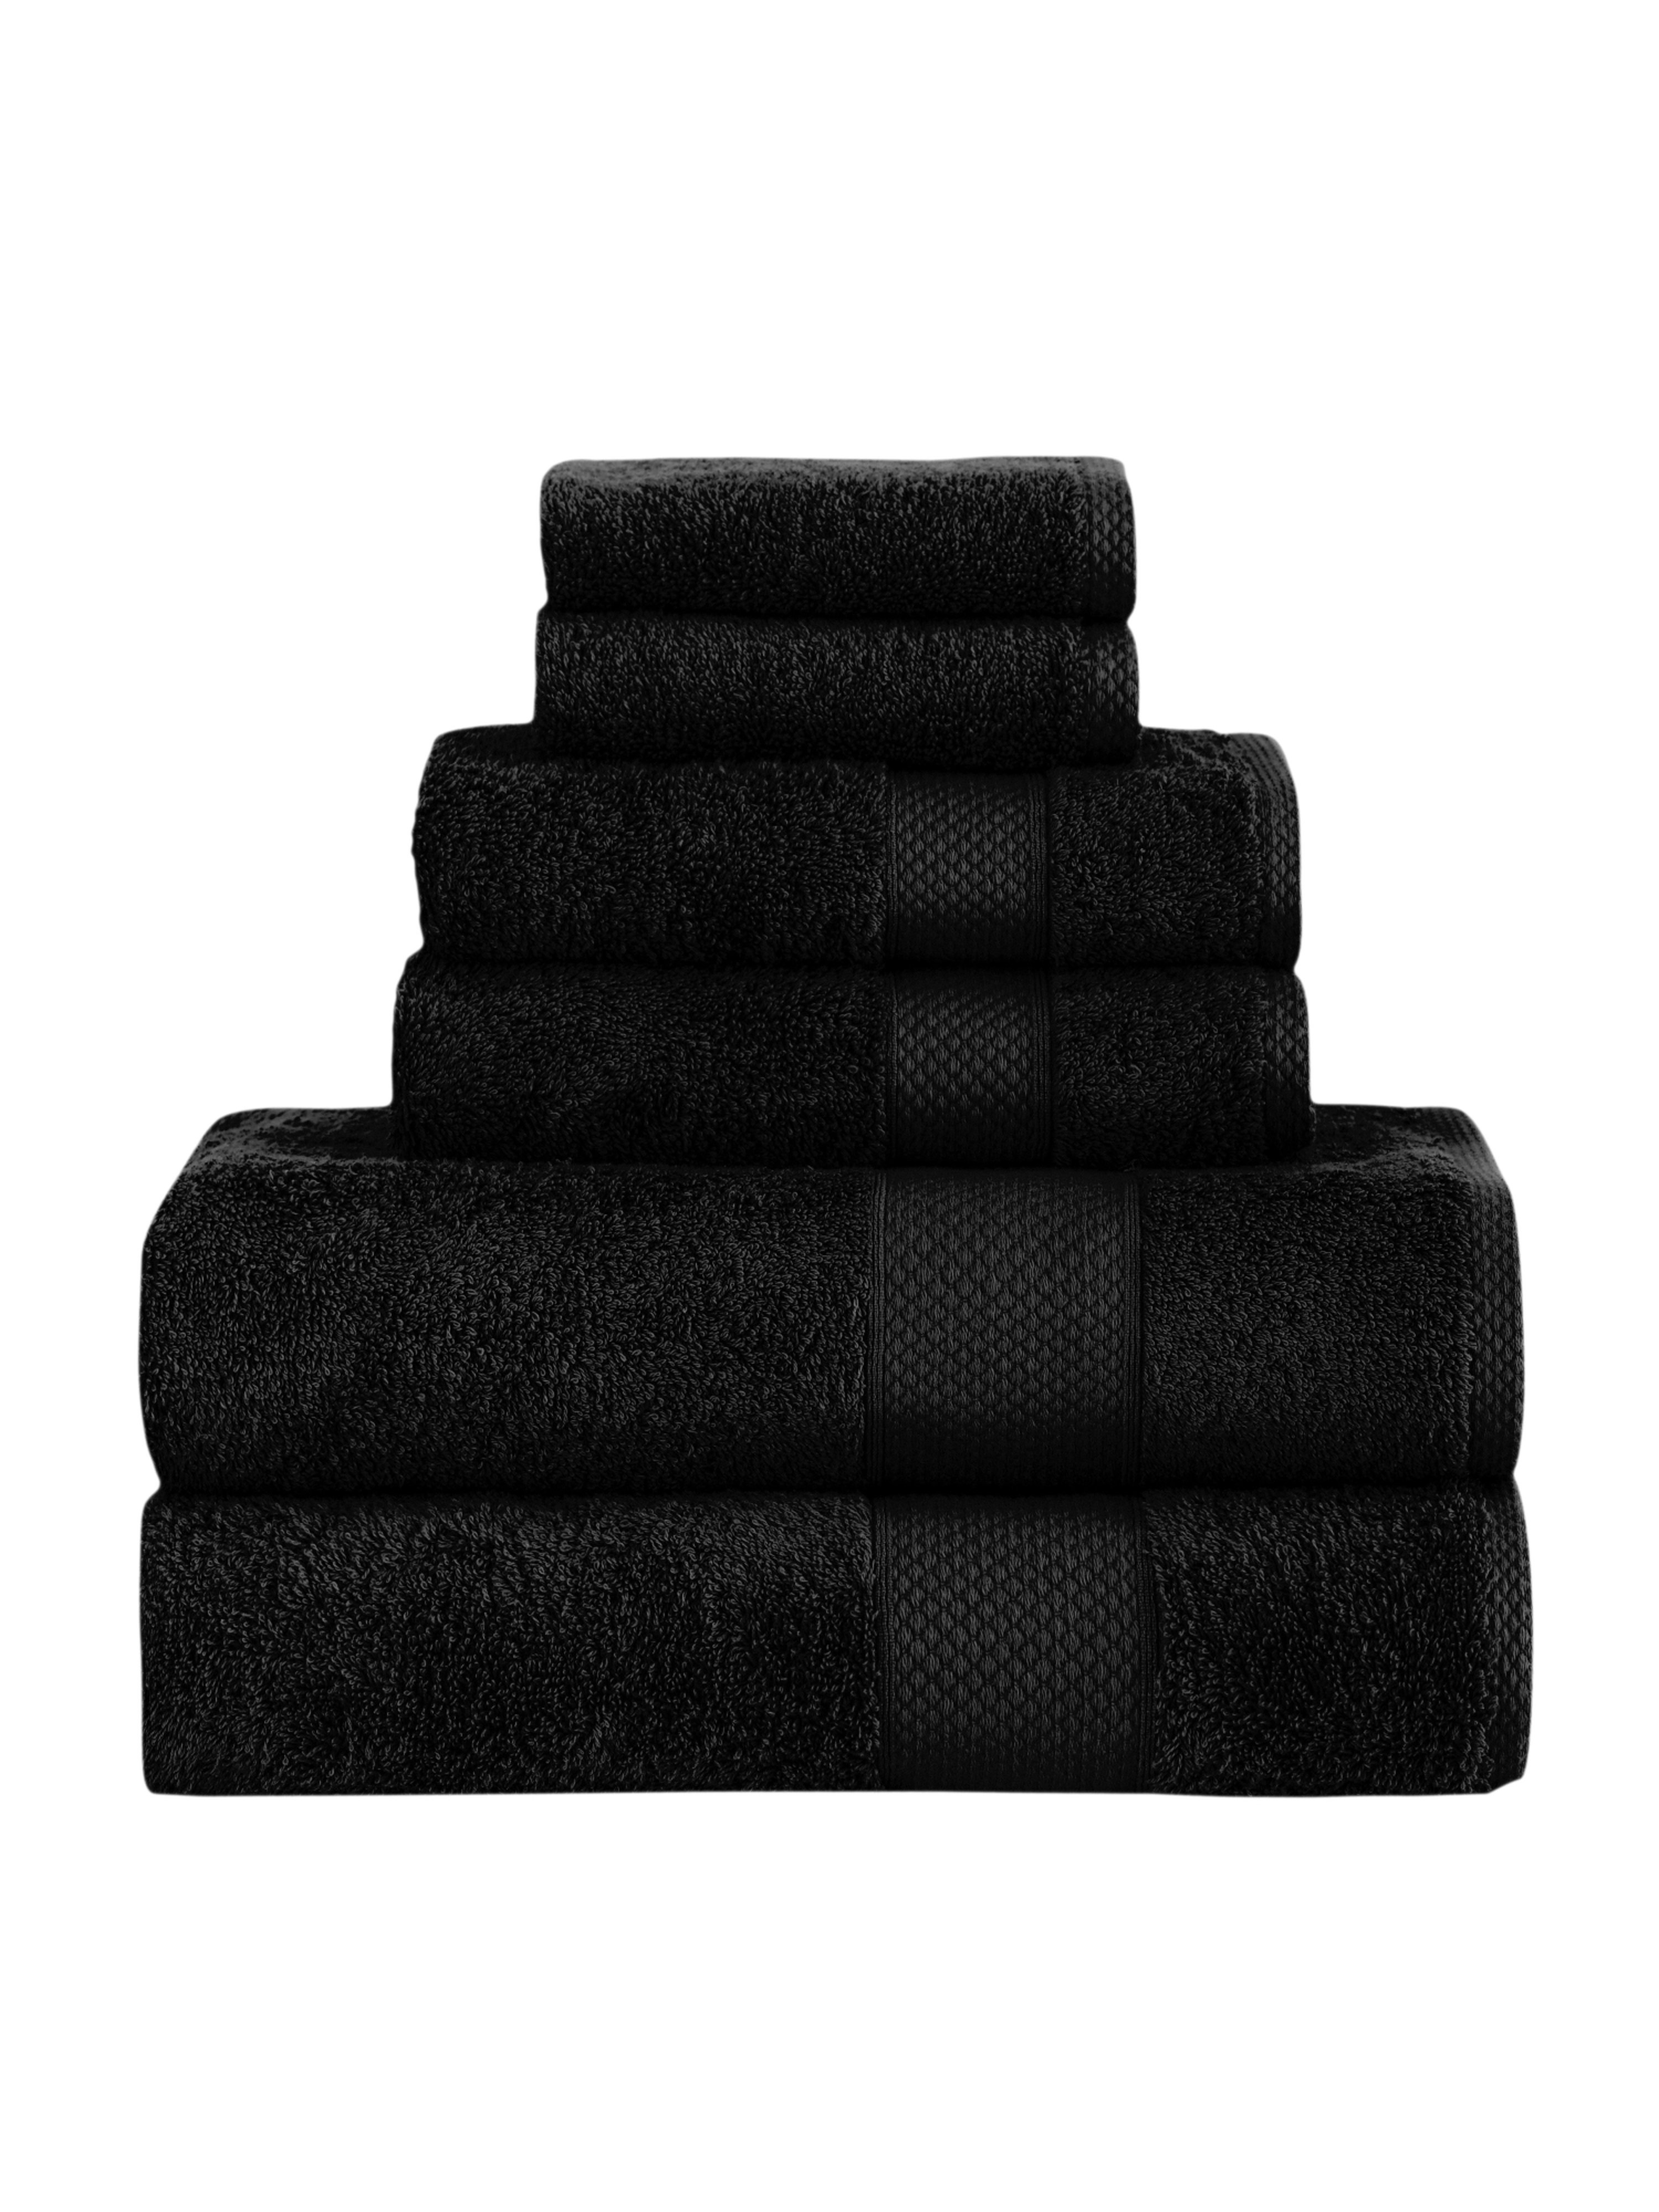 Classic Turkish Towels Madison Towel Collection In Black